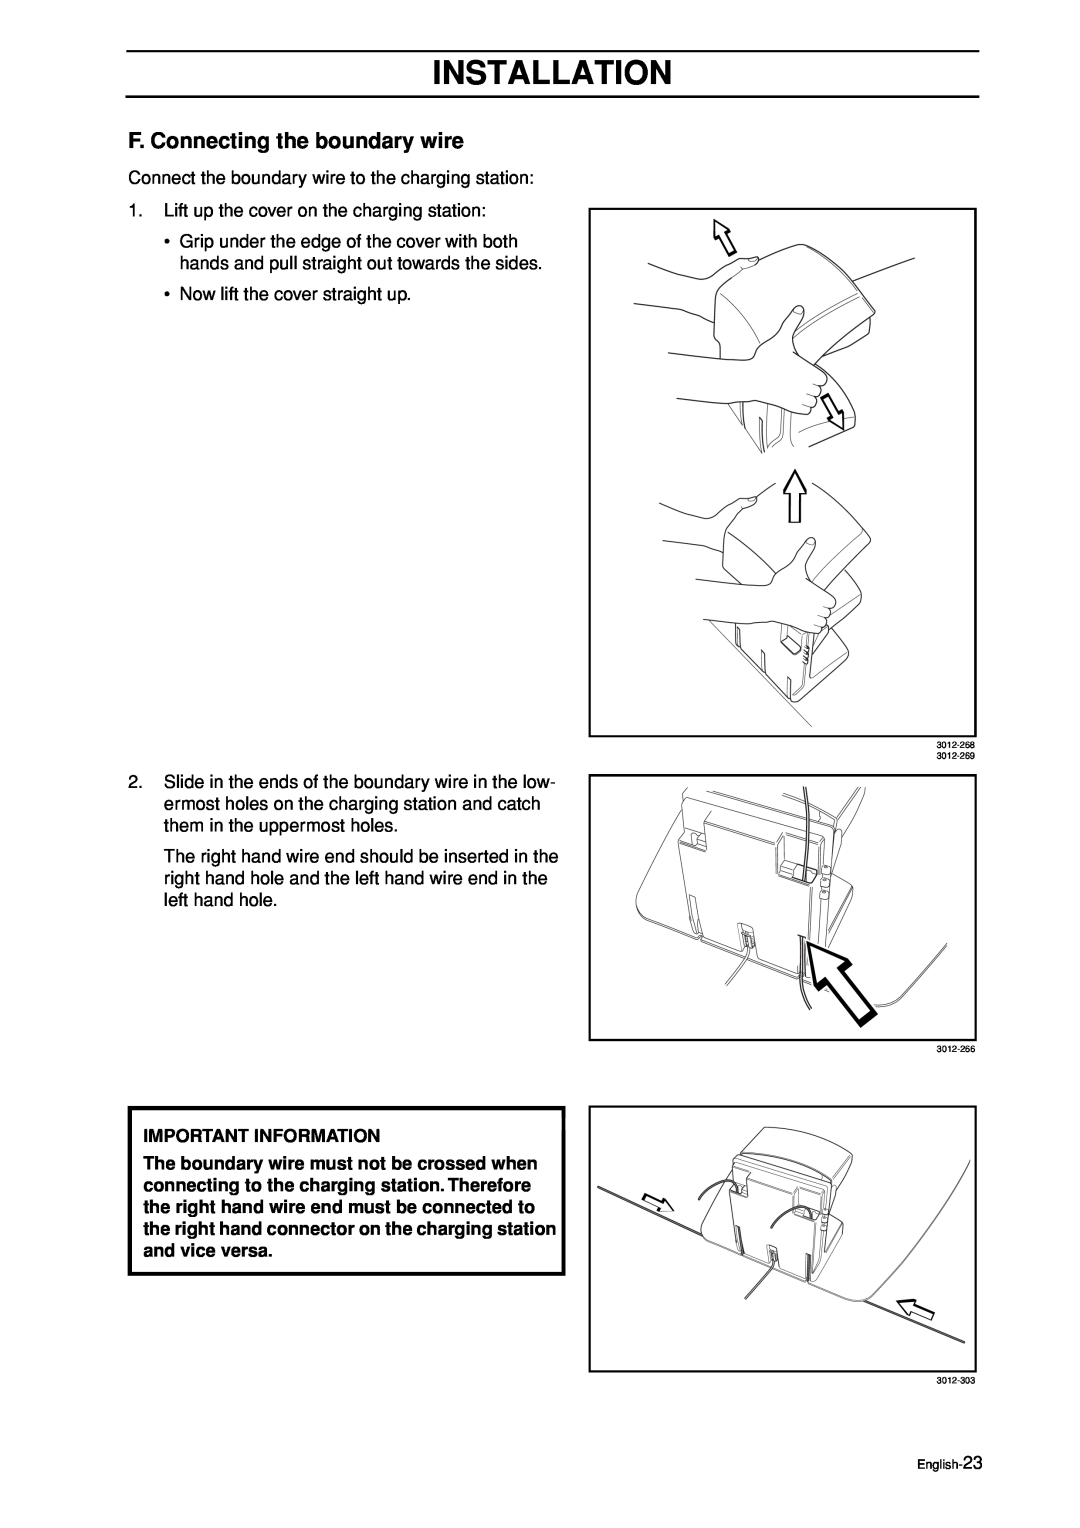 Husqvarna Auto Mower manual F. Connecting the boundary wire, Installation, Important Information 